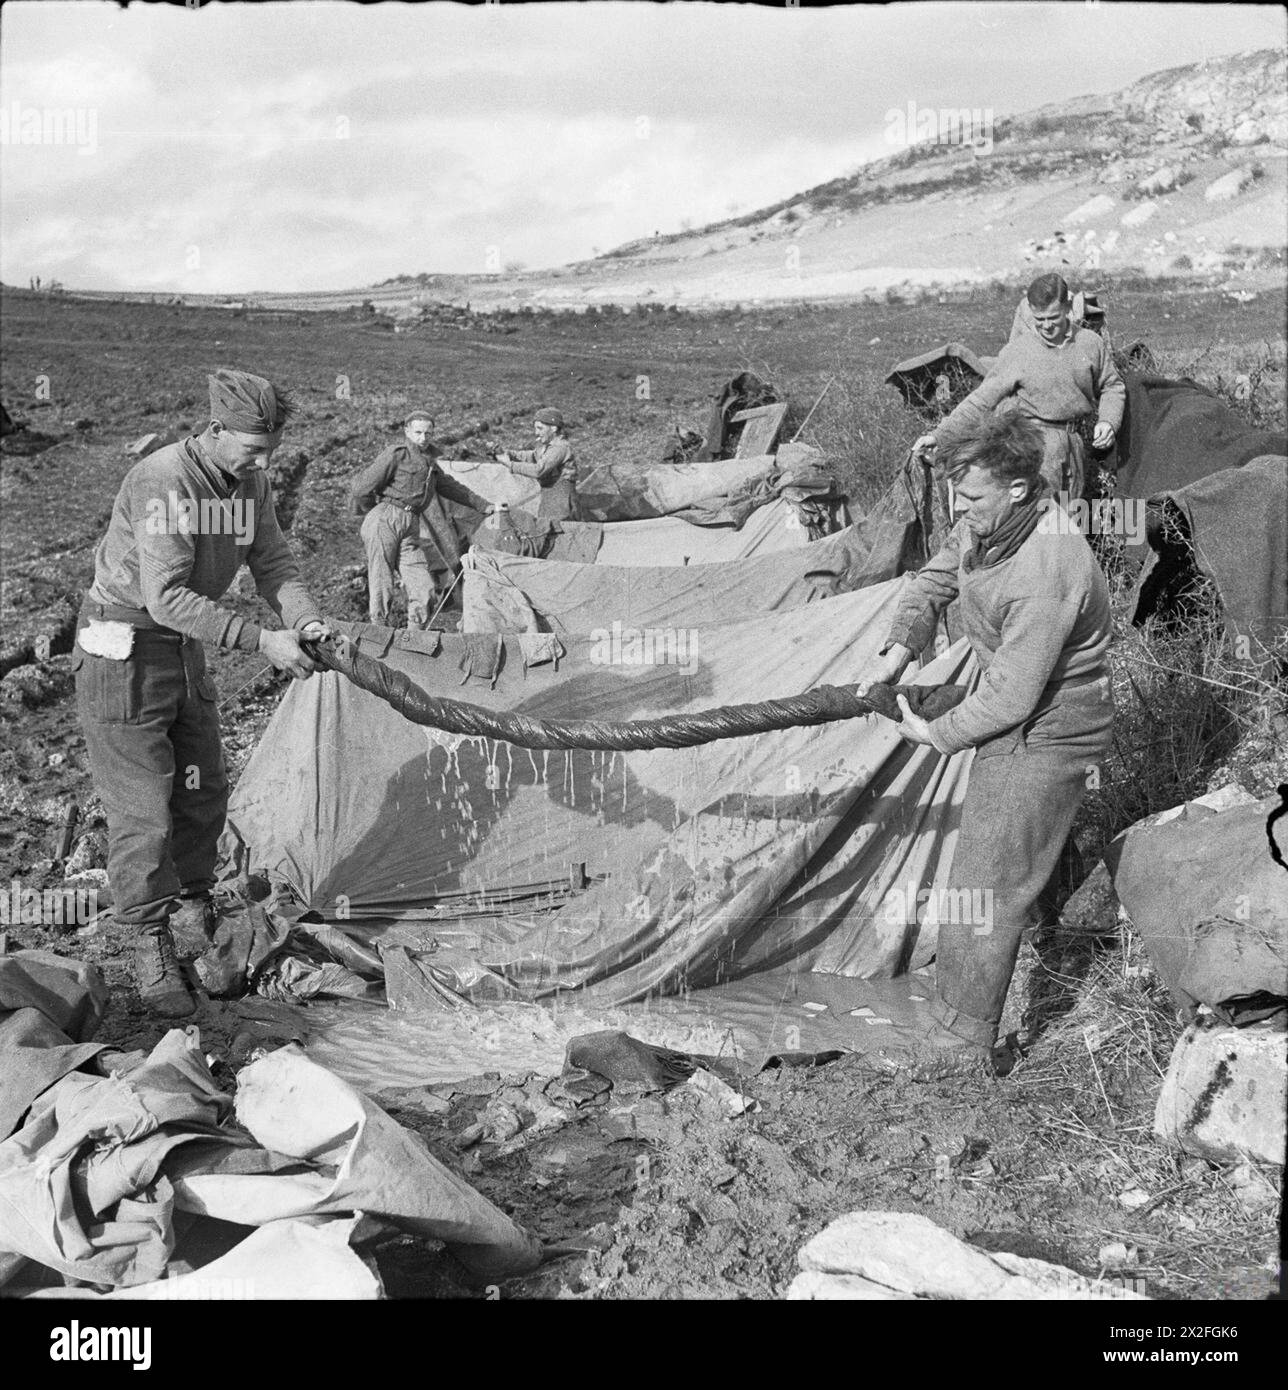 THE CAMPAIGN IN ITALY, SEPTEMBER-DECEMBER 1943: THE ALLIED ADVANCE TO THE GUSTAV LINE - Monte Camino November - December 1943: Two artillerymen (Sergeant J Hamilton and Gunner H Tennant) wringing water out of a blanket at their flooded bivouac on Monte Camino British Army, Royal Artillery Stock Photo